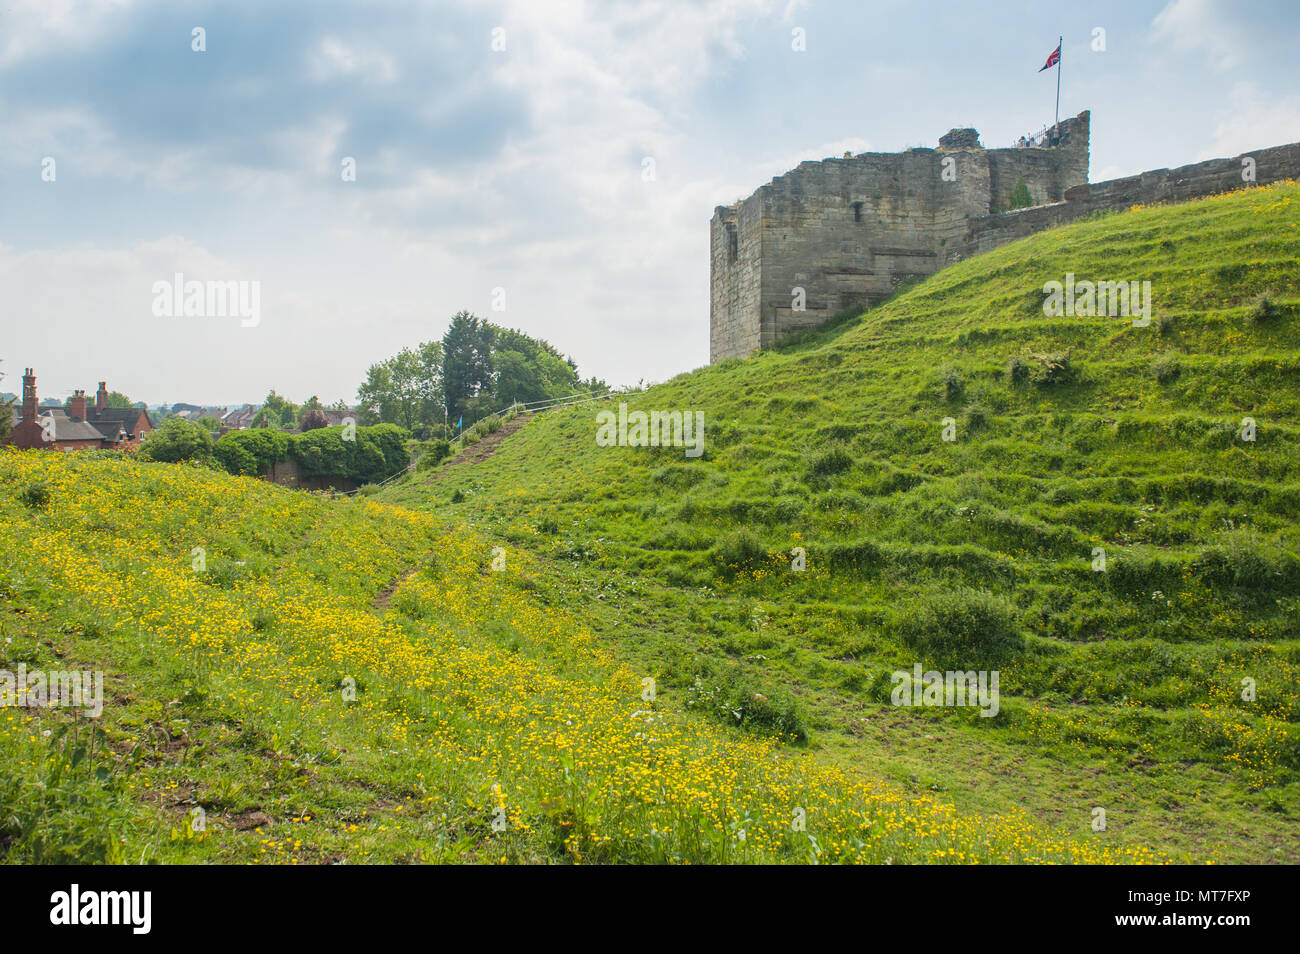 The ruins of Tutbury Castle in the village of Tutbury, Staffordshire, England on Monday 28th May 2018. Stock Photo